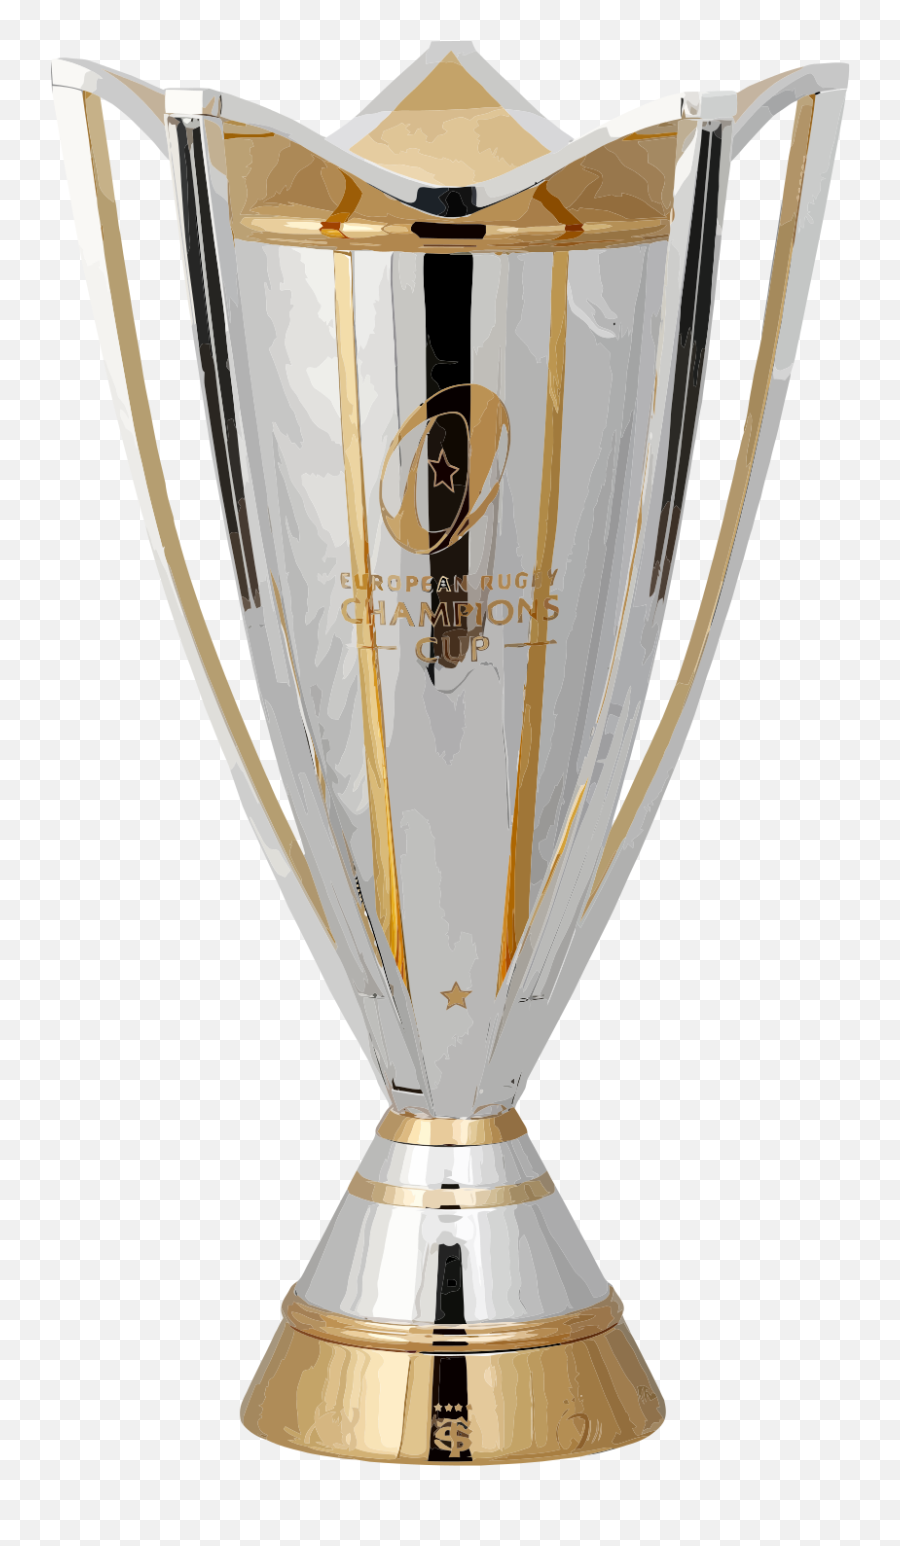 European Rugby Champions Cup Trophy - European Champions Cup Trophy Emoji,Emoji Trophy Case